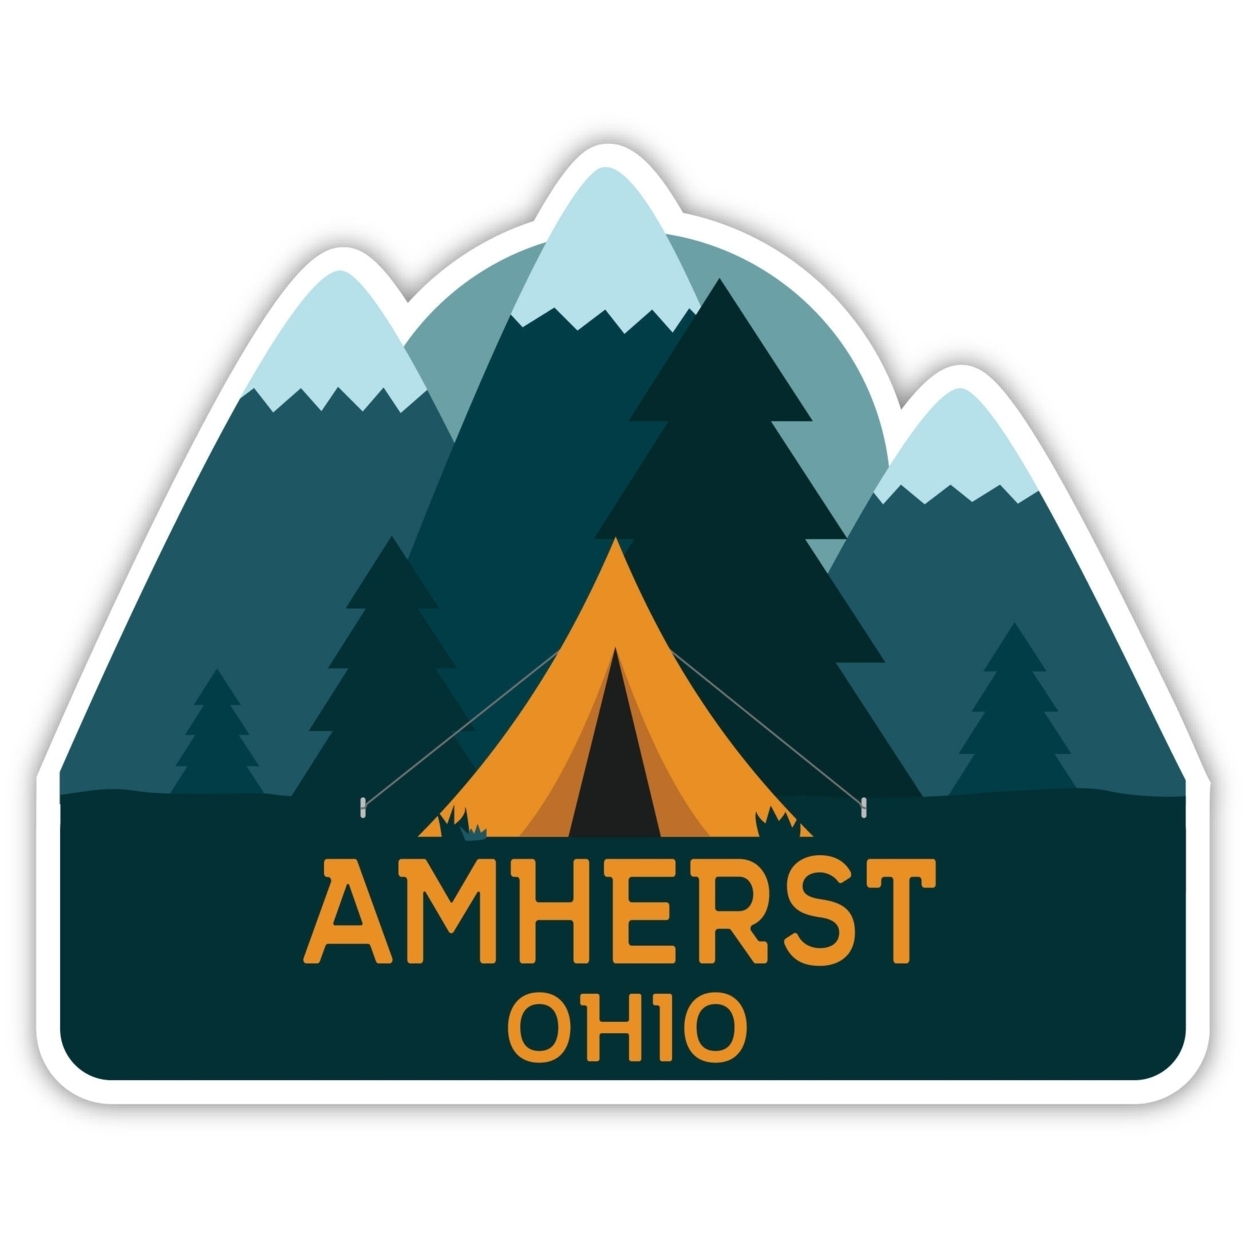 Amherst Ohio Souvenir Decorative Stickers (Choose Theme And Size) - 4-Pack, 10-Inch, Tent